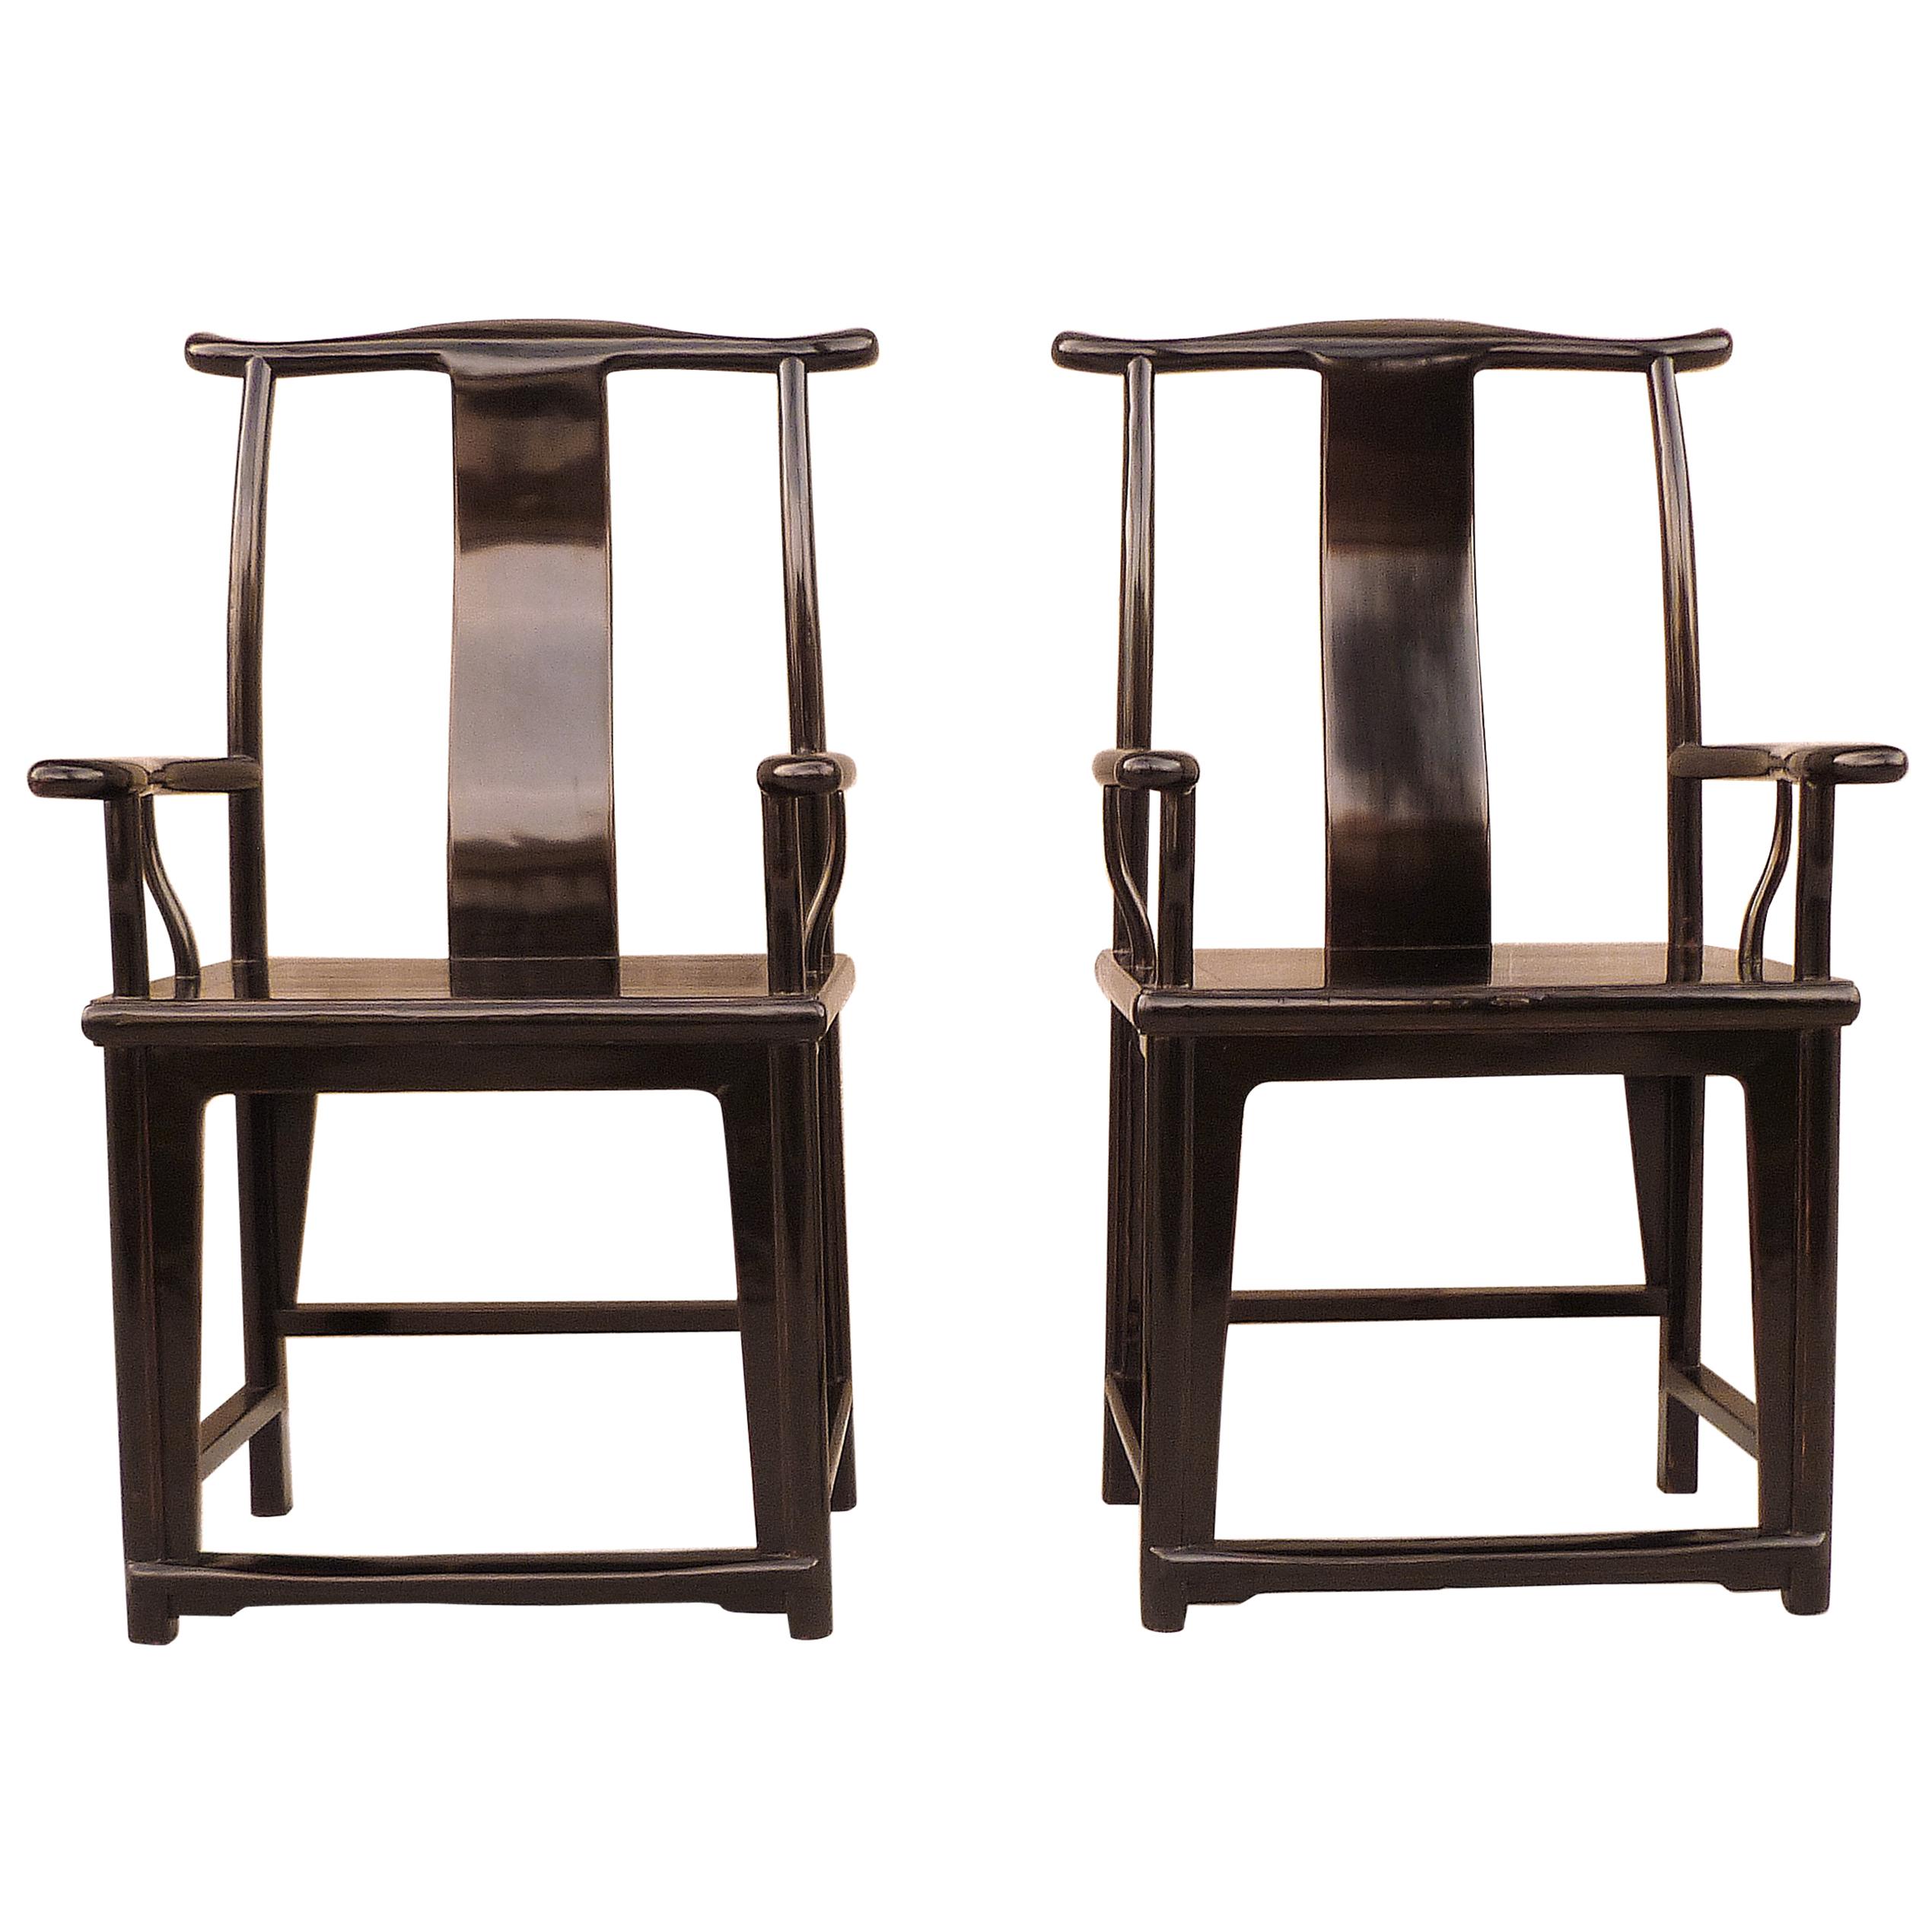 Pair of Refine Black Lacquer Armchairs